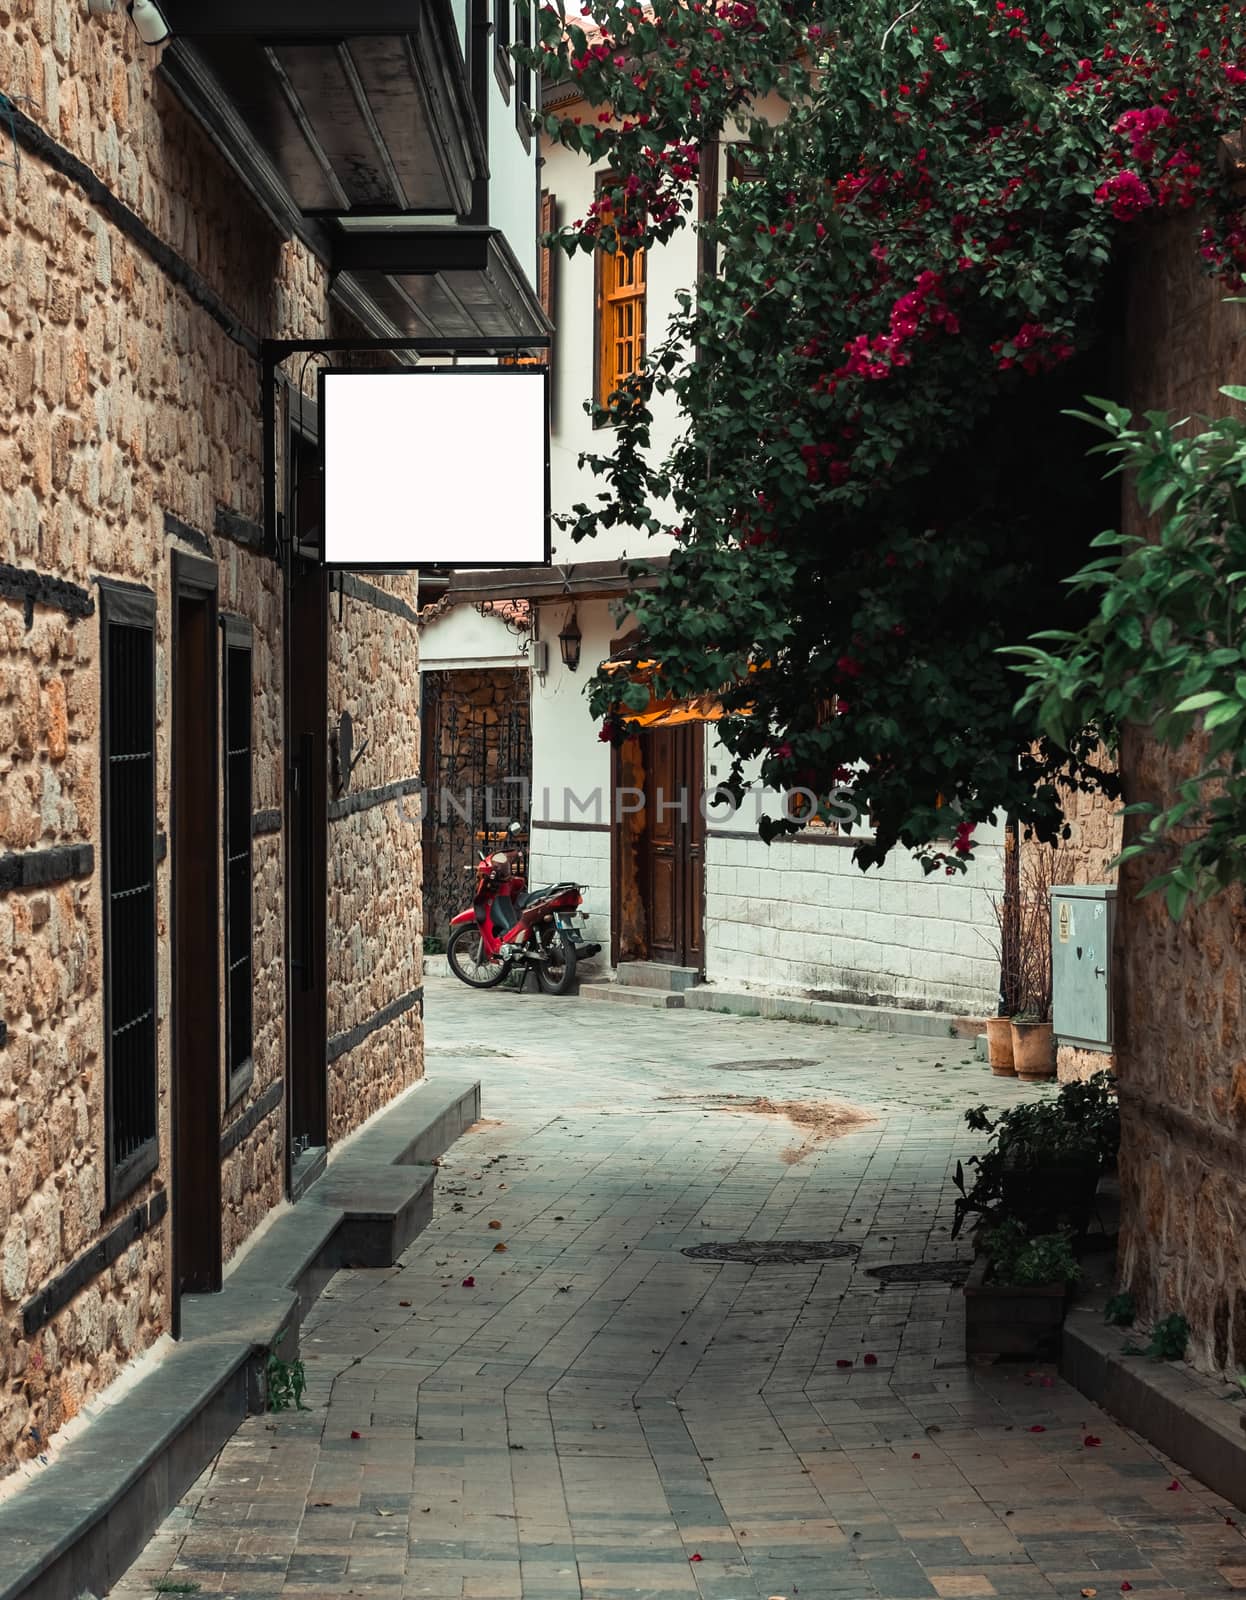 Old town in city centrum is a must see place for tourists during their visit to Antalya.